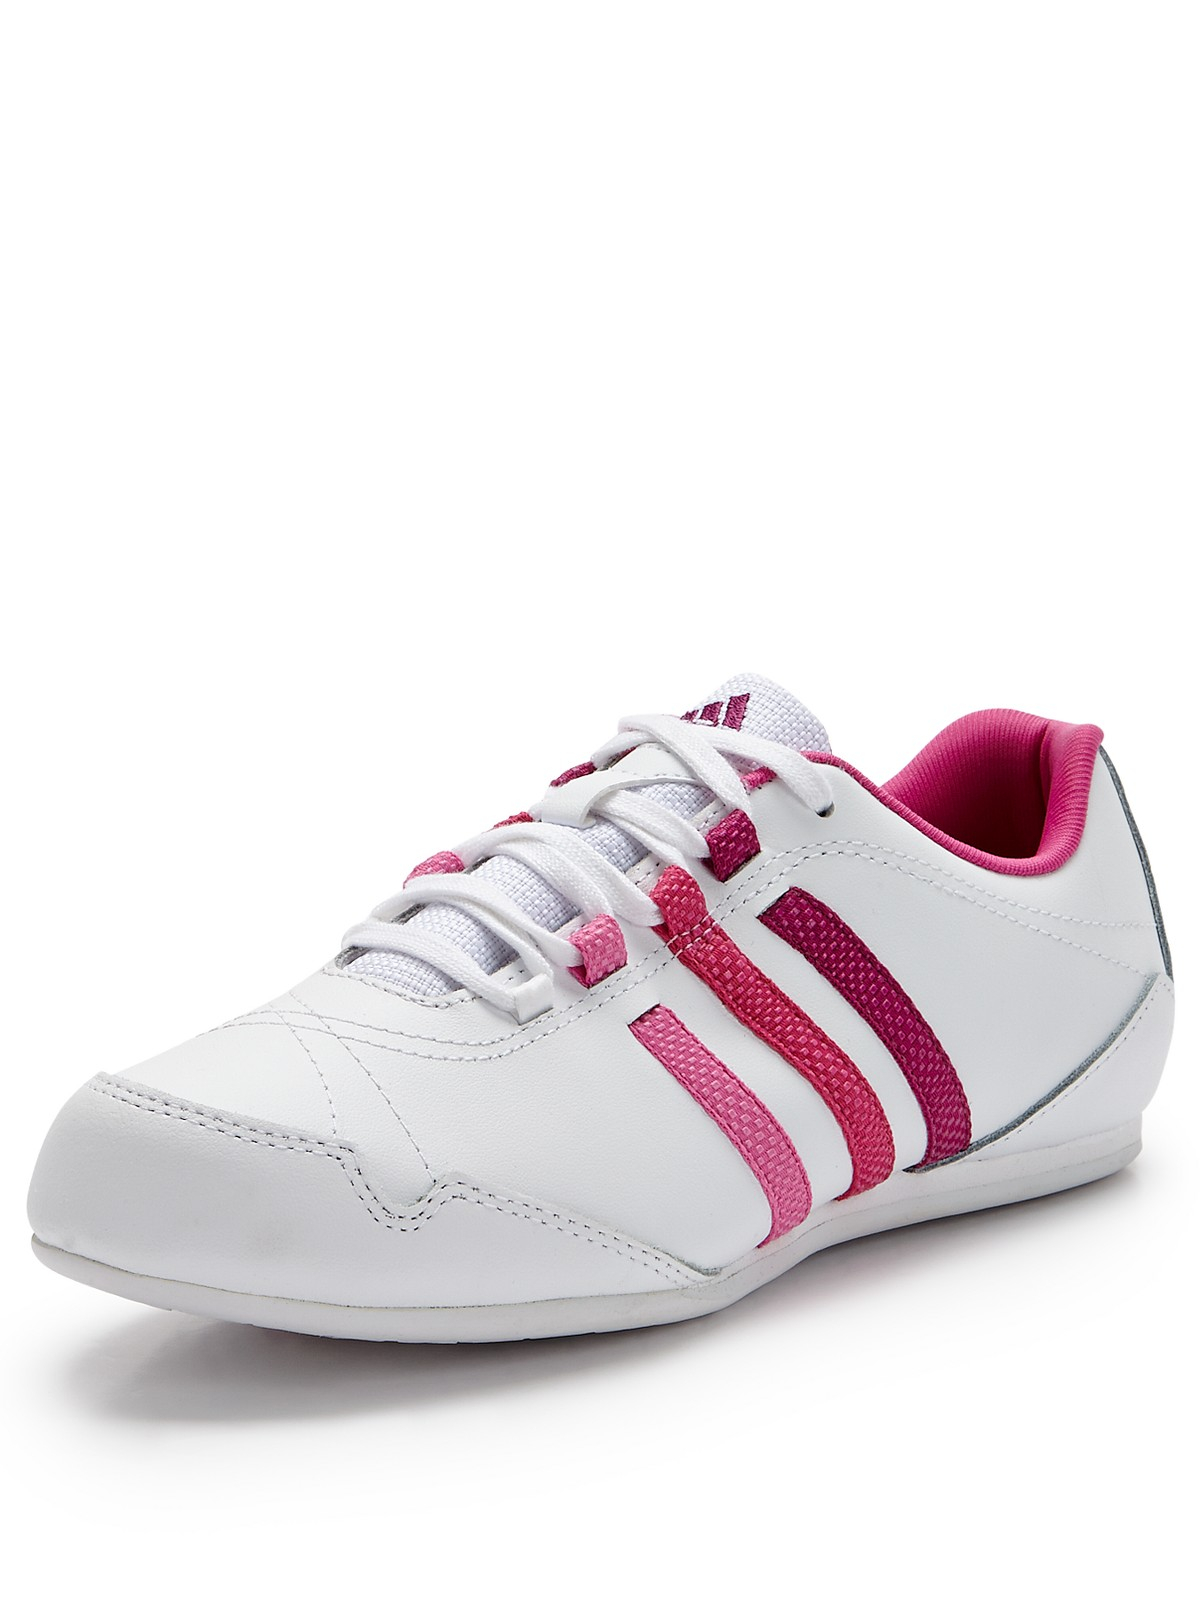 Adidas Yatra Ladies Trainers in Pink (white/pink) | Lyst